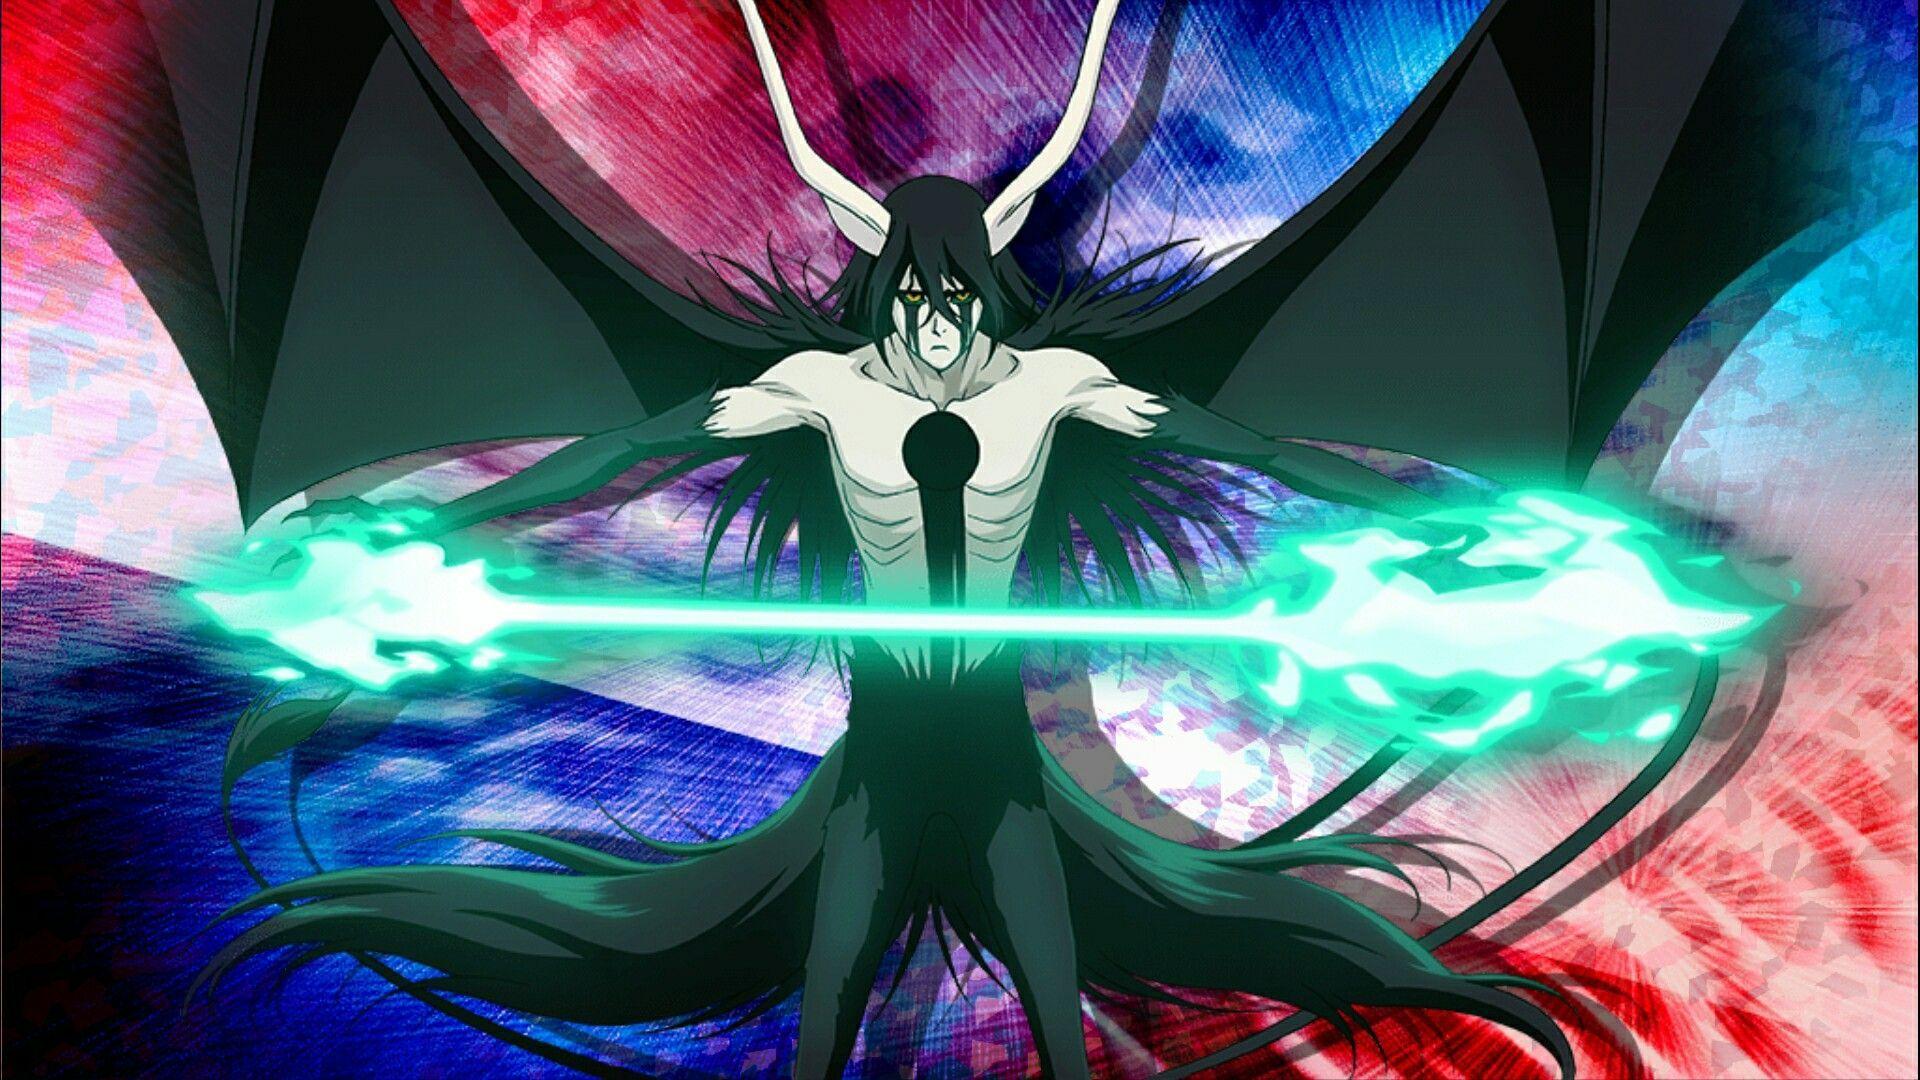 Bleach Brave Souls Wallpapers - Top Free Bleach Brave Souls Backgrounds ...